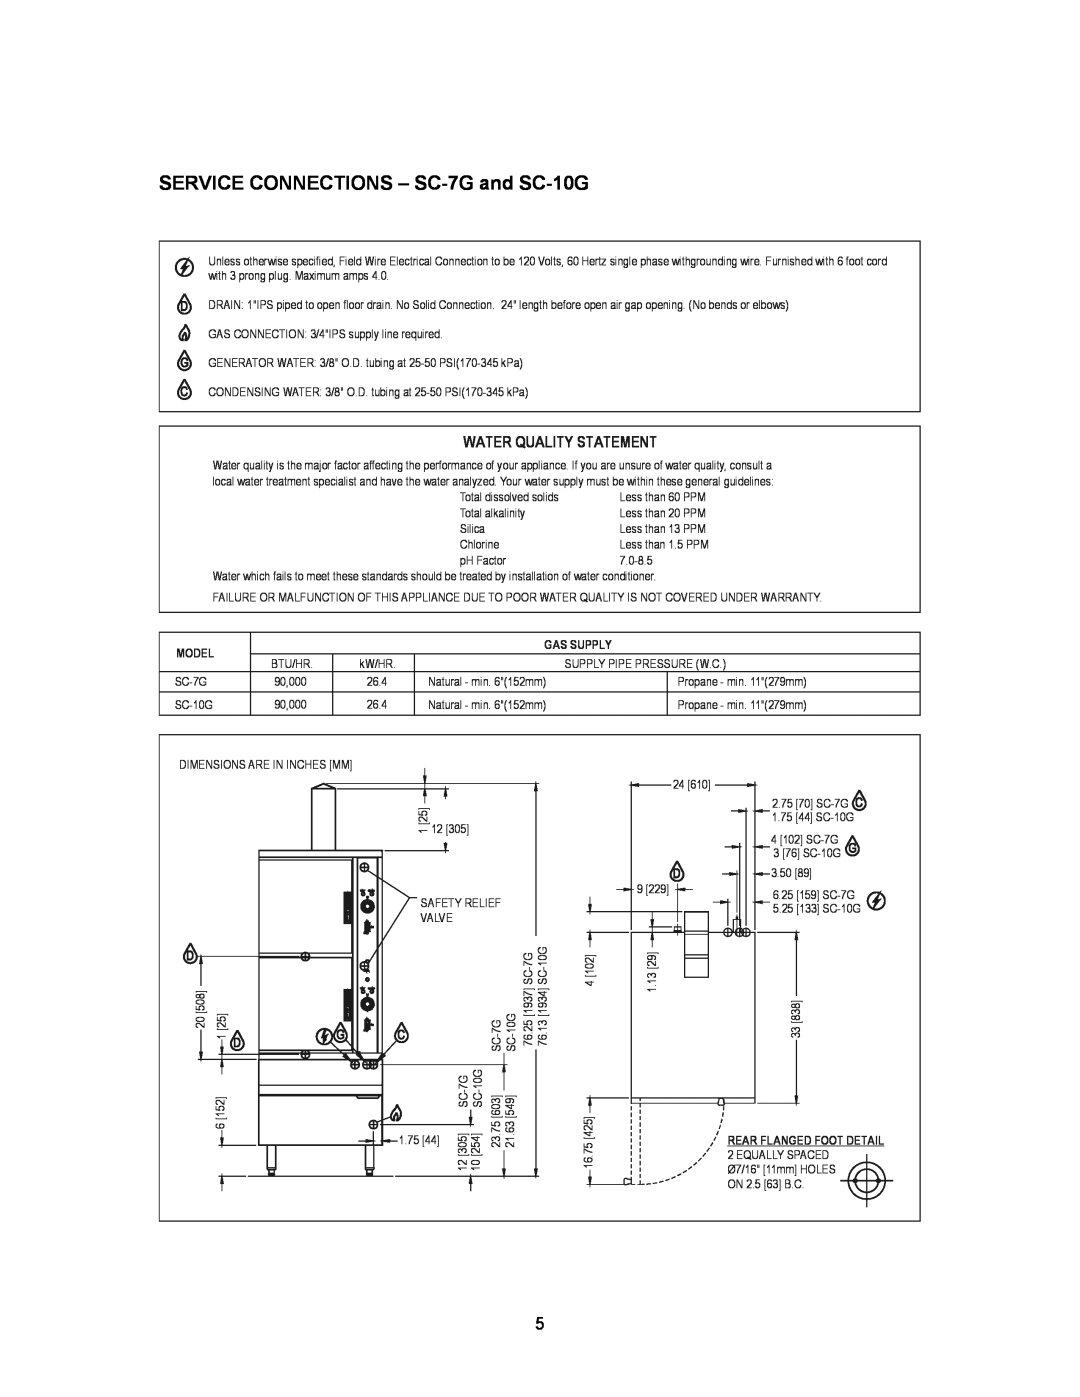 Blodgett SN-5G manual SERVICE CONNECTIONS - SC-7Gand SC-10G, Water Quality Statement, Model, Gas Supply 